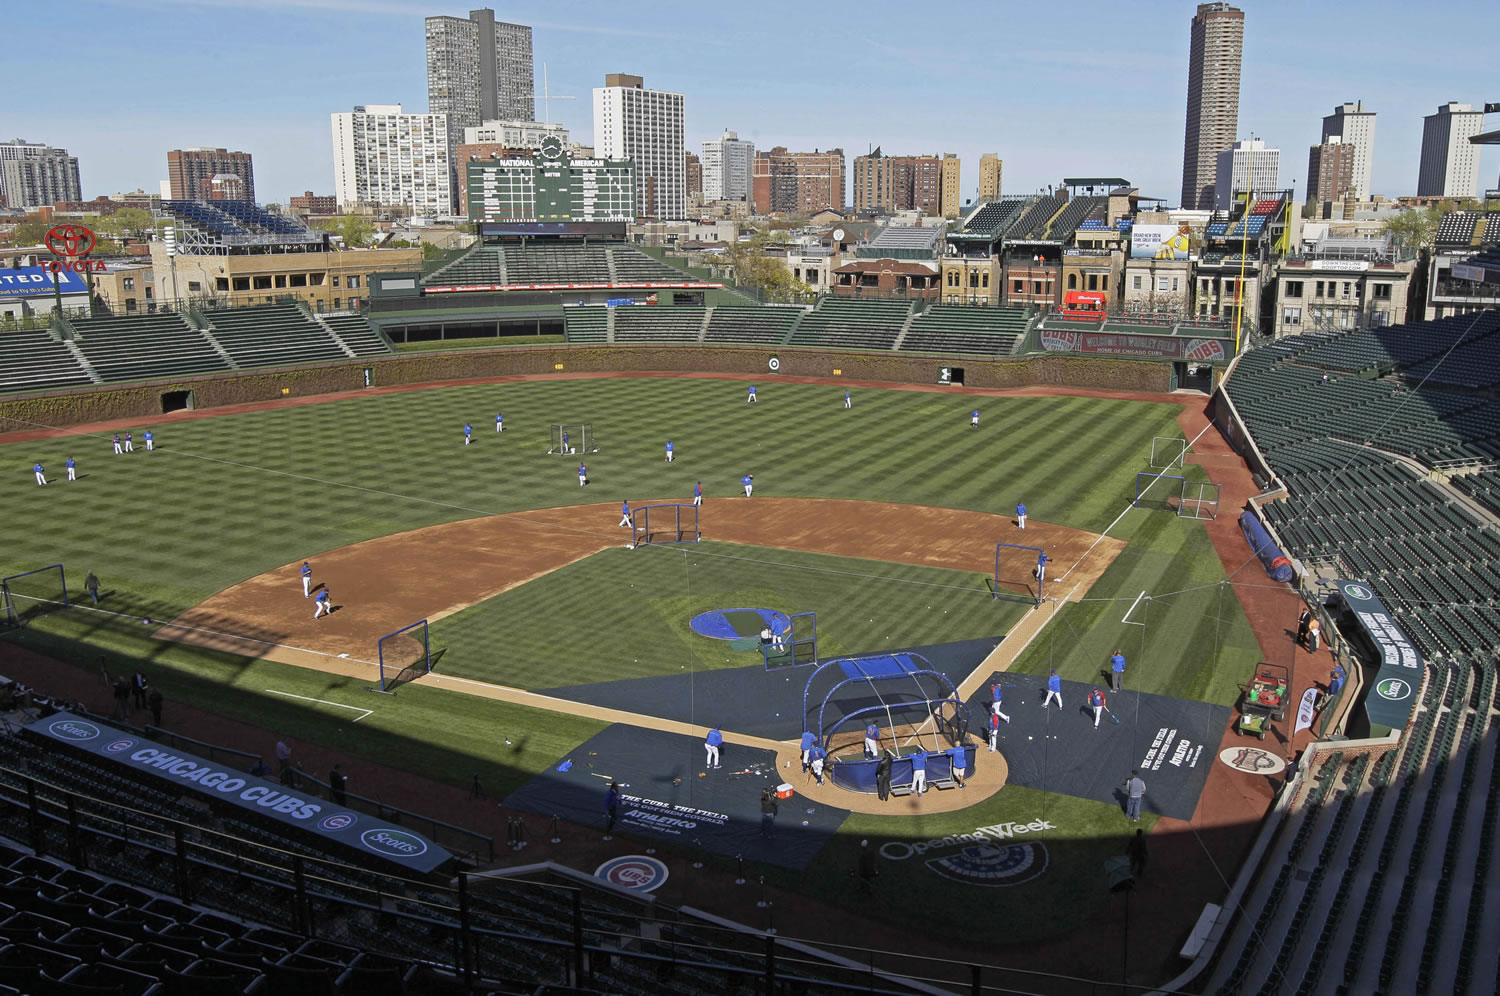 In an agreement announced Sunday, April 14, 2013, Wrigley Field will get a $500 million facelift, including its first electronic outfield video board, as part of a hard-fought agreement between the City of Chicago and the ball team.